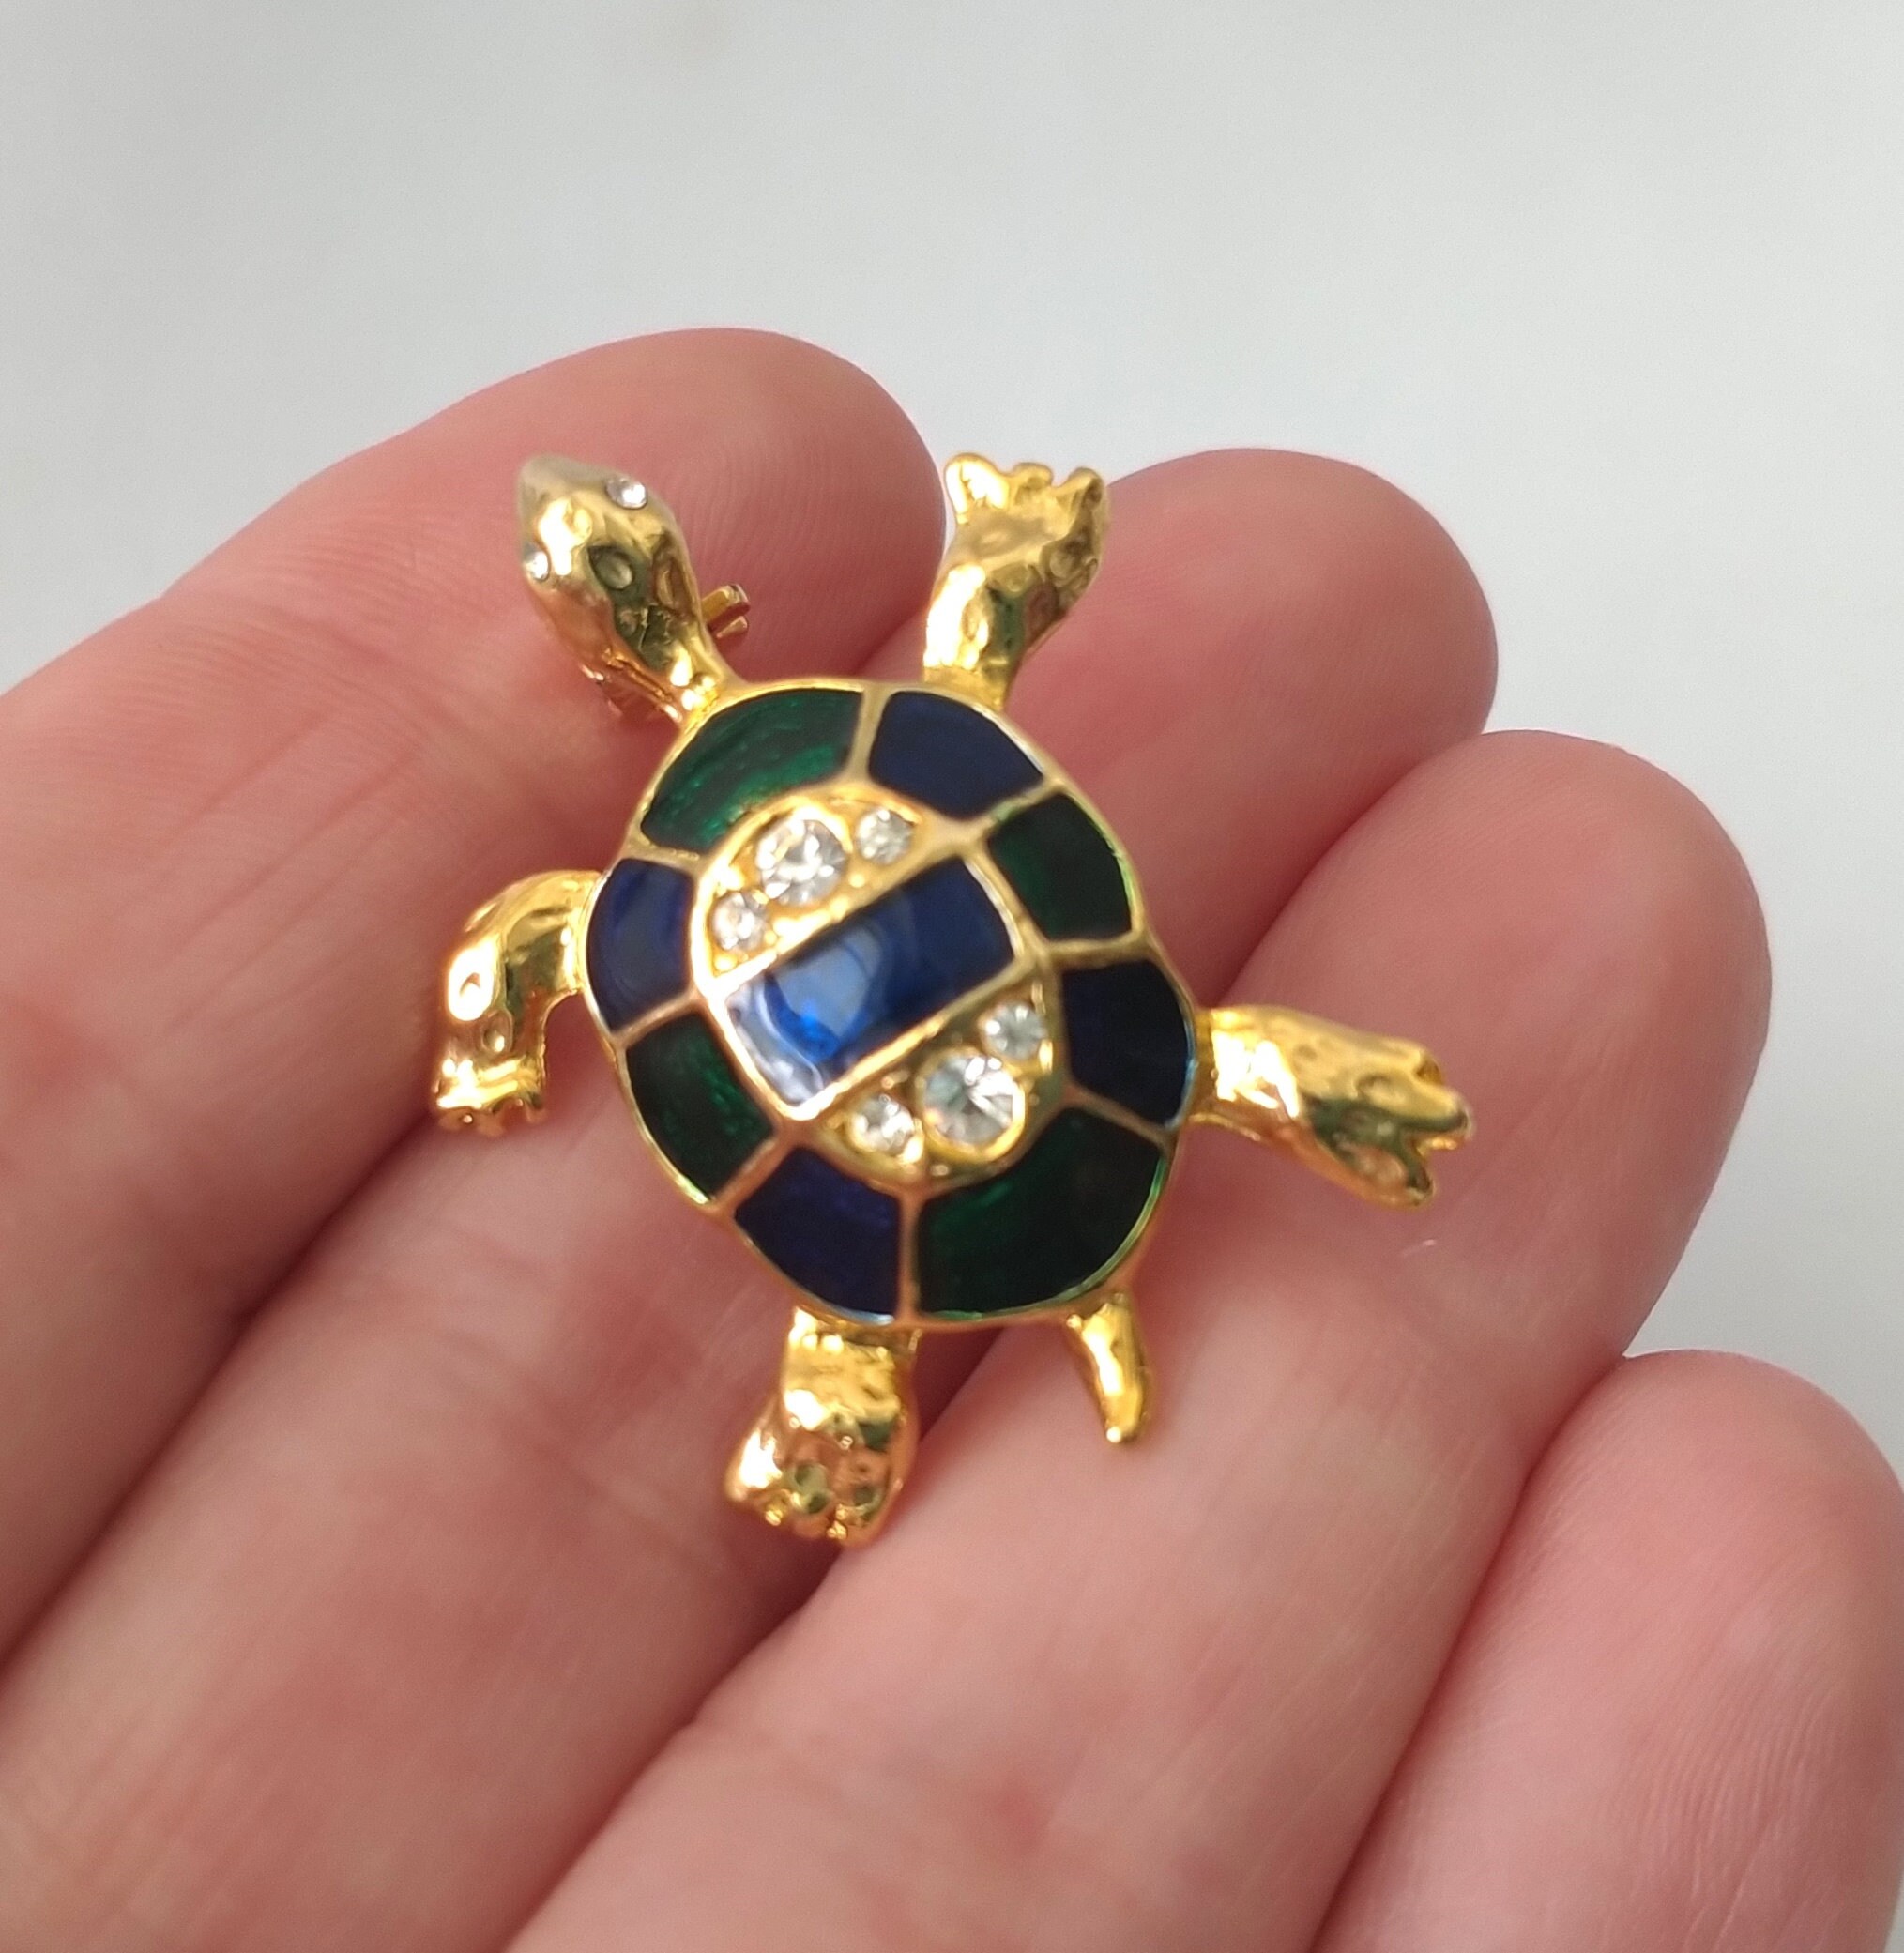 Details about   Sea Turtle with Green Crystals Vintage Gold Pin Brooch D-1359 